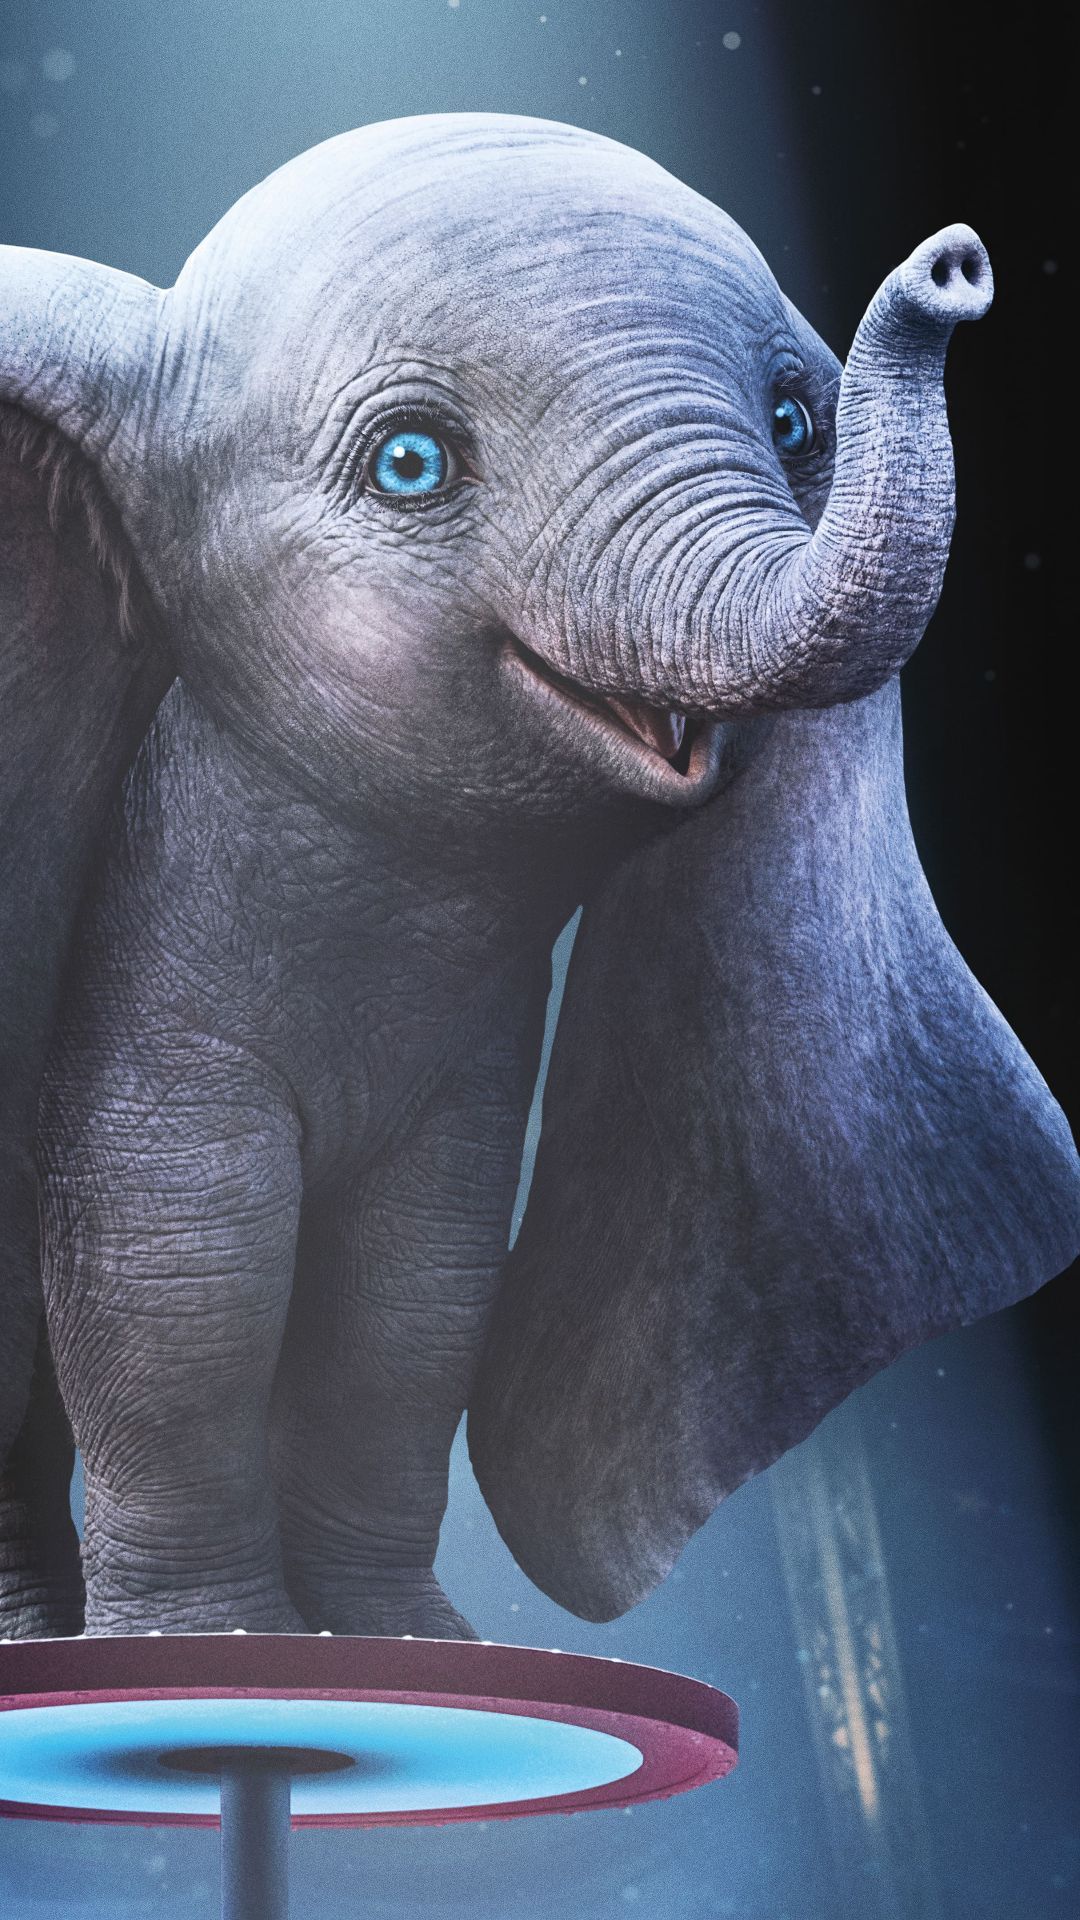 Dumbo Movie Wallpapers - Wallpaper Cave